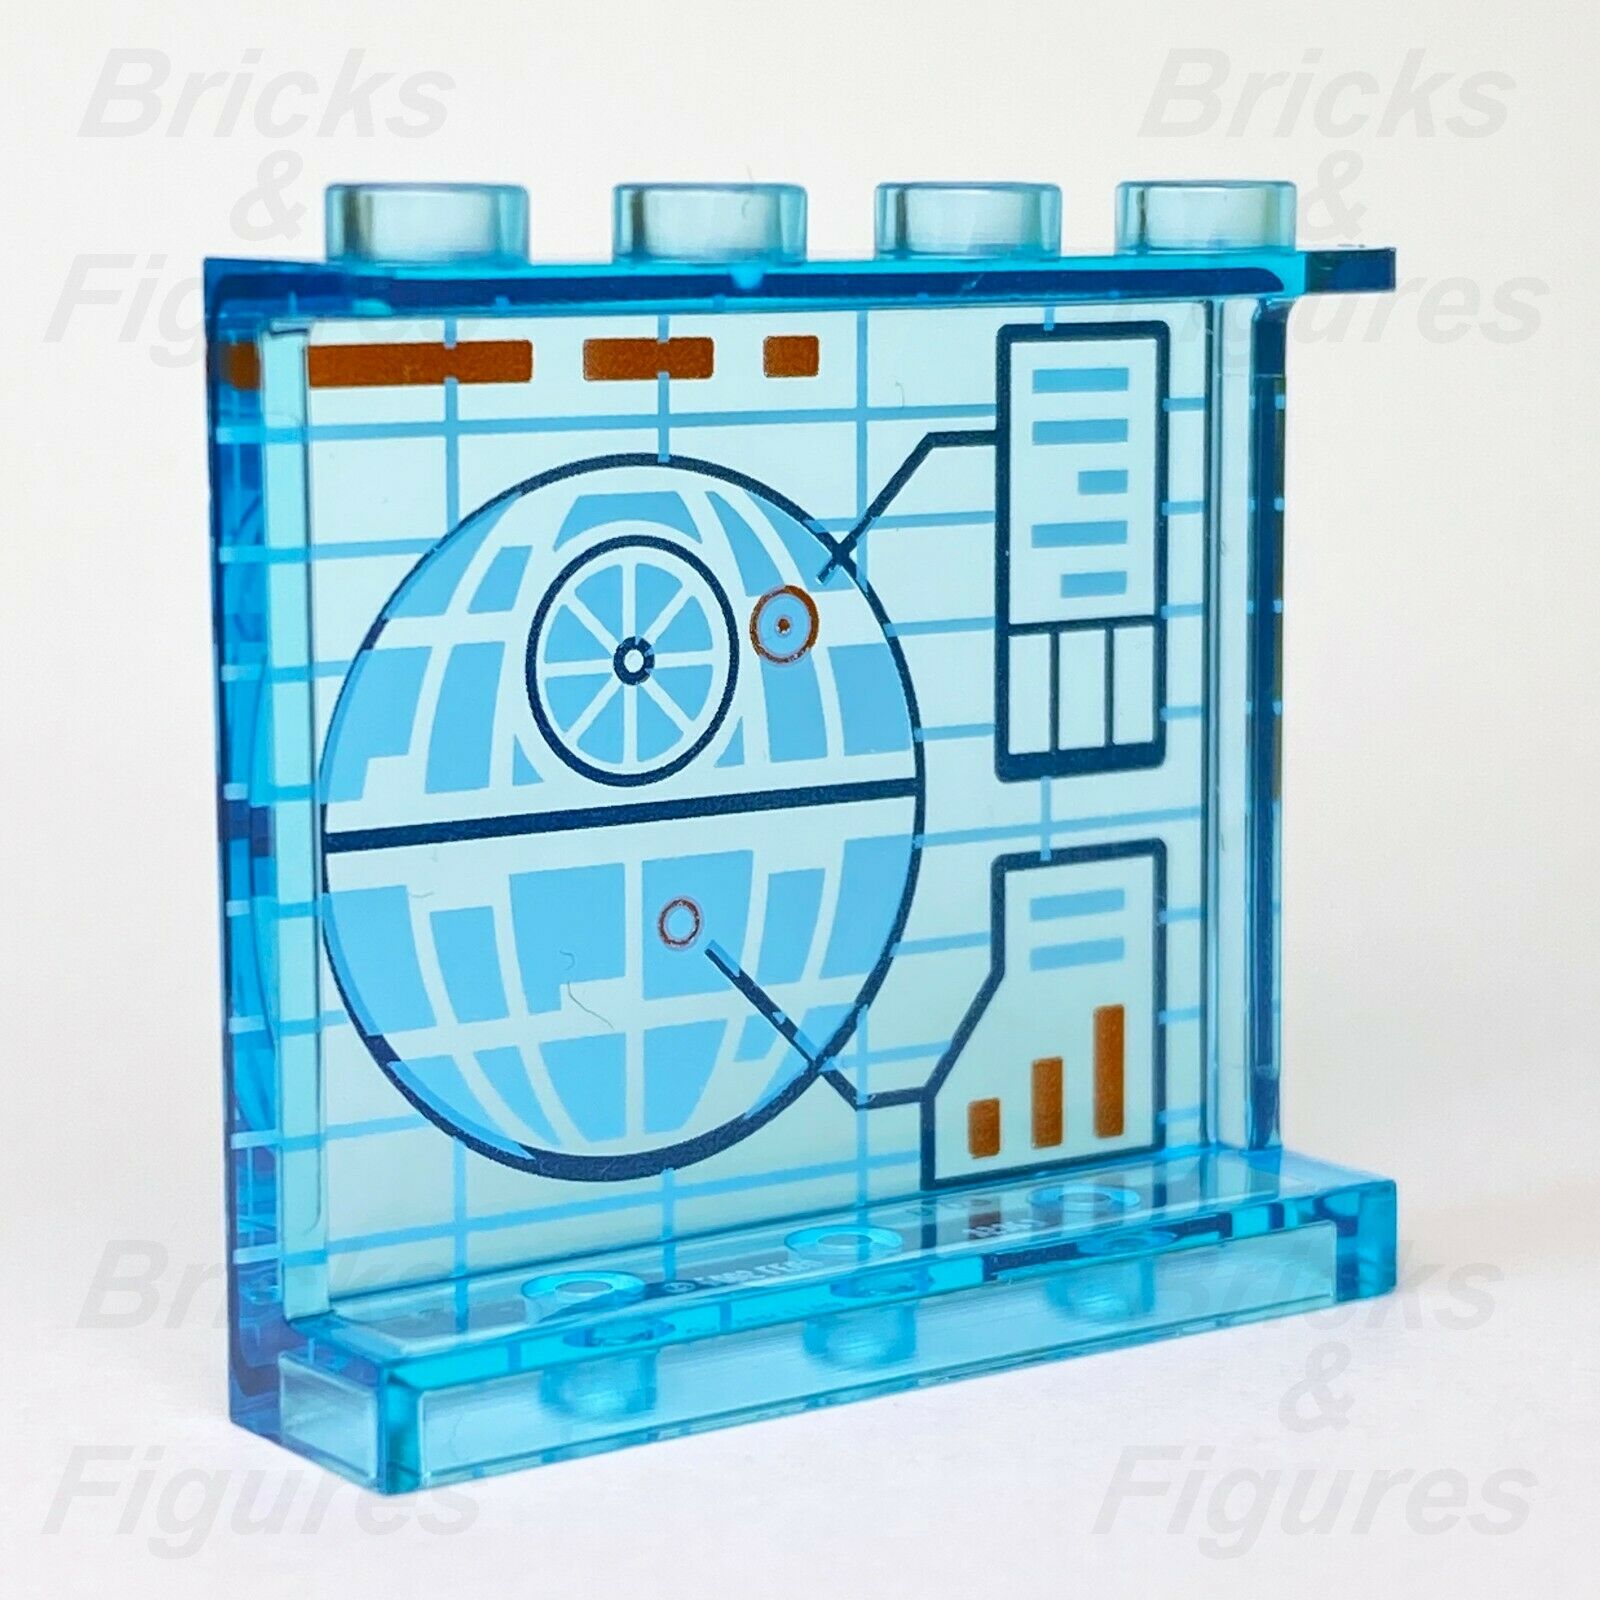 New Star Wars LEGO Screen with Death Star Plans Genuine Part from set 75237 - Bricks & Figures